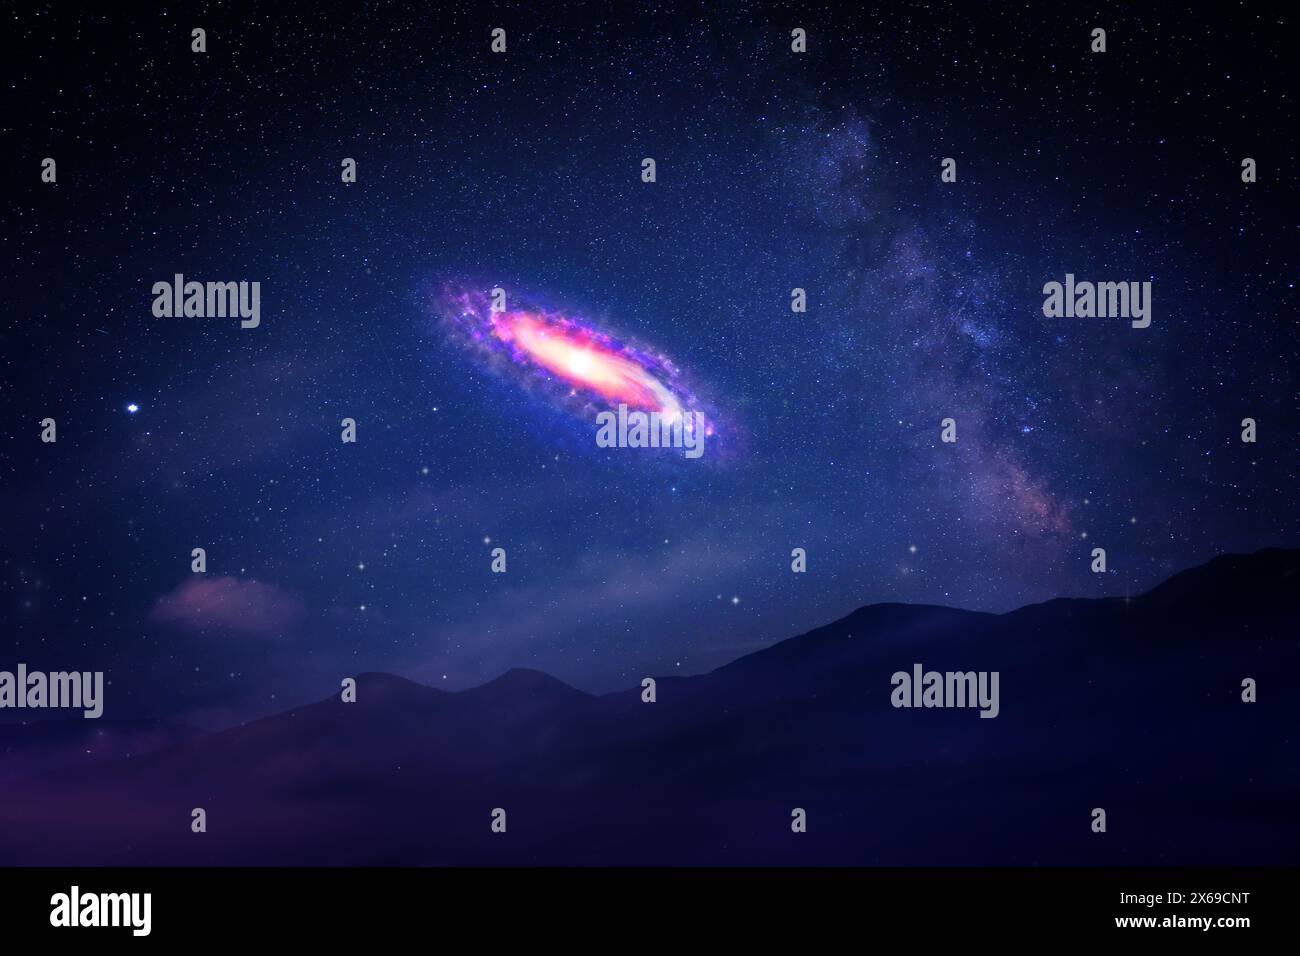 Beautiful spiral galaxy in starry sky over mountains Stock Photo